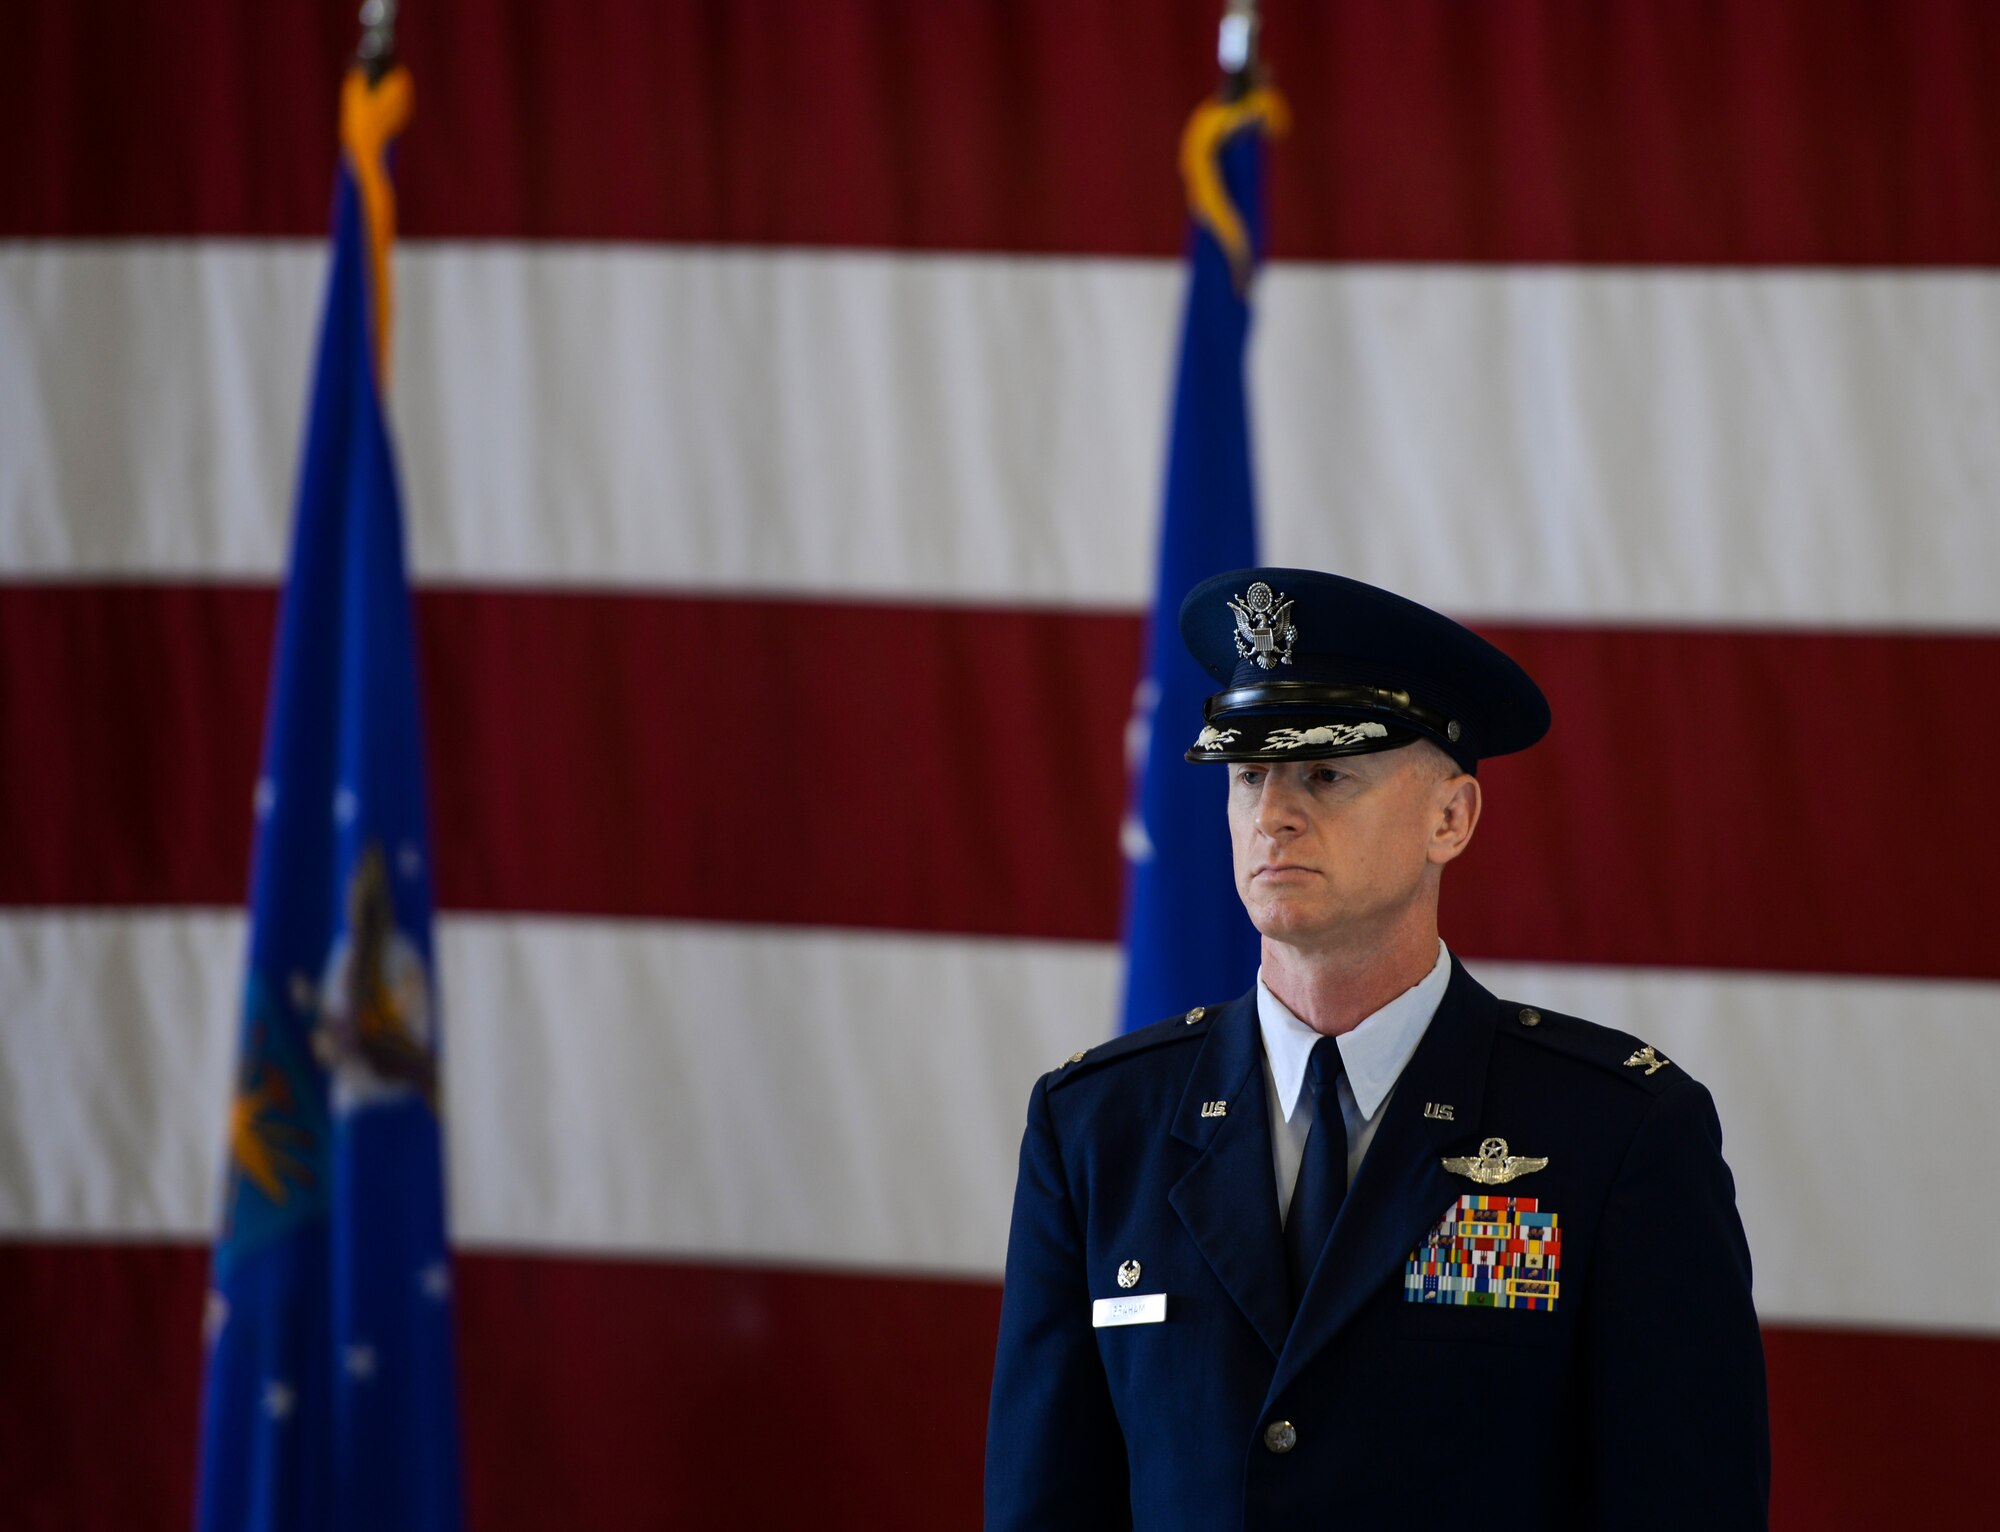 Col. Seth Graham, 14th Flying Training Wing commander, stands at attention during the wing’s change of command ceremony May 18, 2020, at Columbus Air Force Base, Miss. Prior to serving as commander, Graham was the 509th Bomb Wing commander at Whiteman AFB, Mo. (U.S. Air Force photo by Airman 1st Class Davis Donaldson)